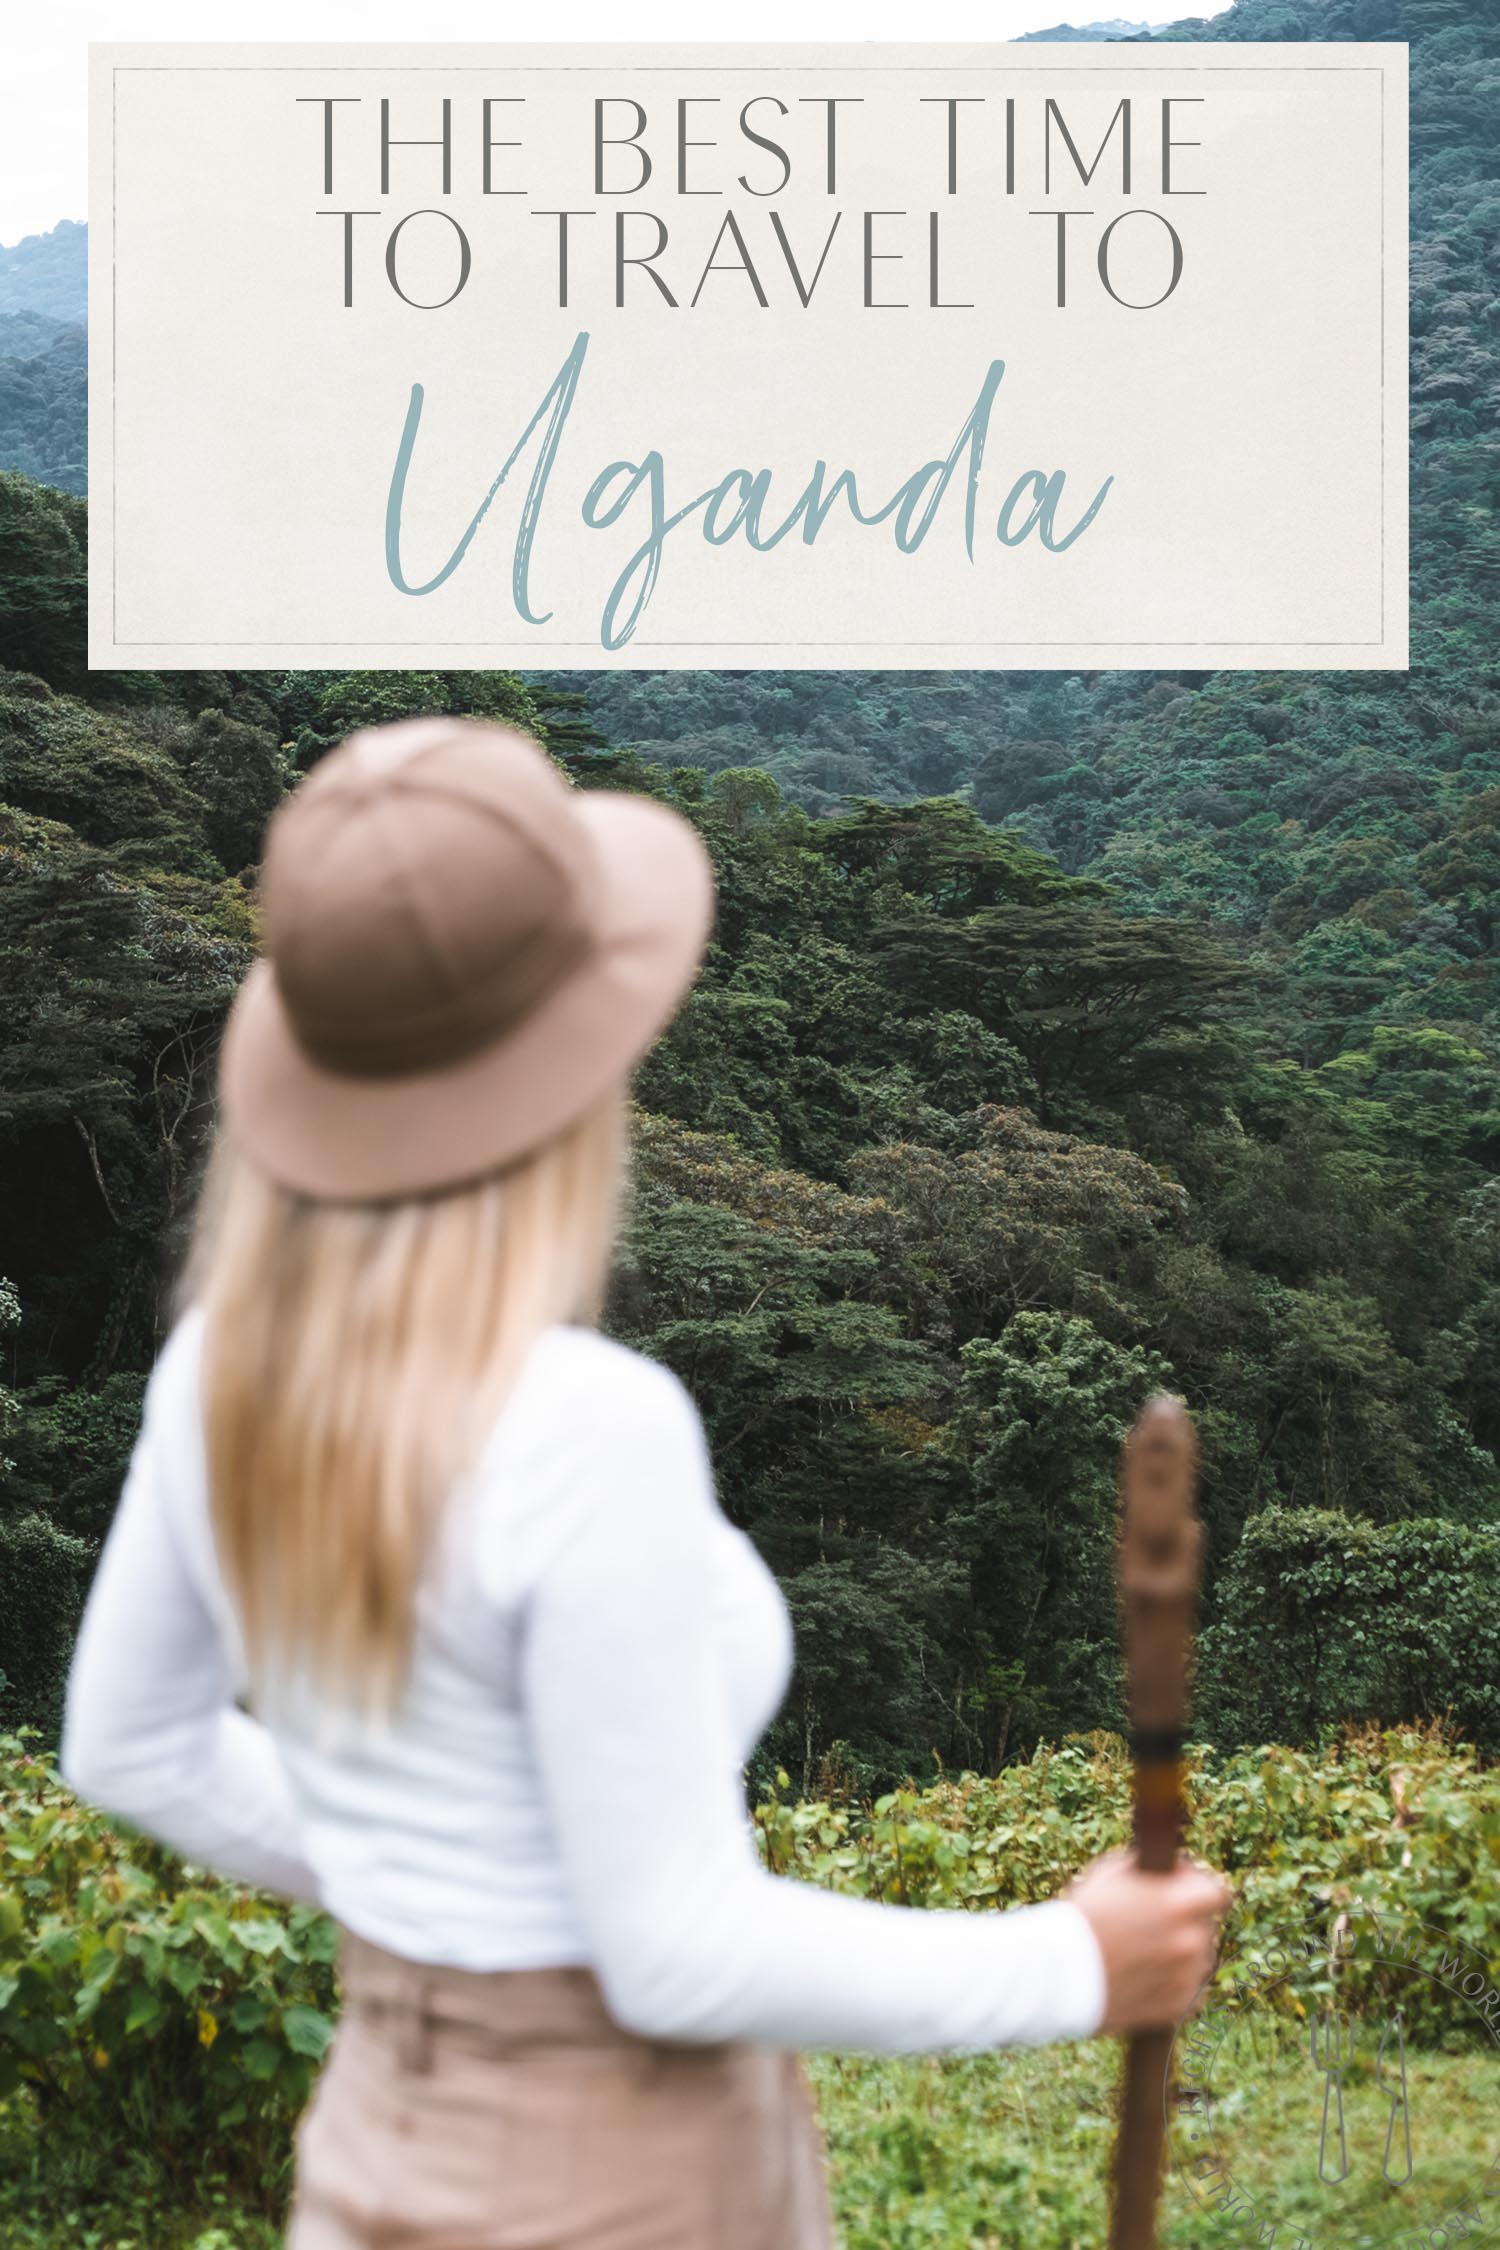 Best Time to Travel to Uganda